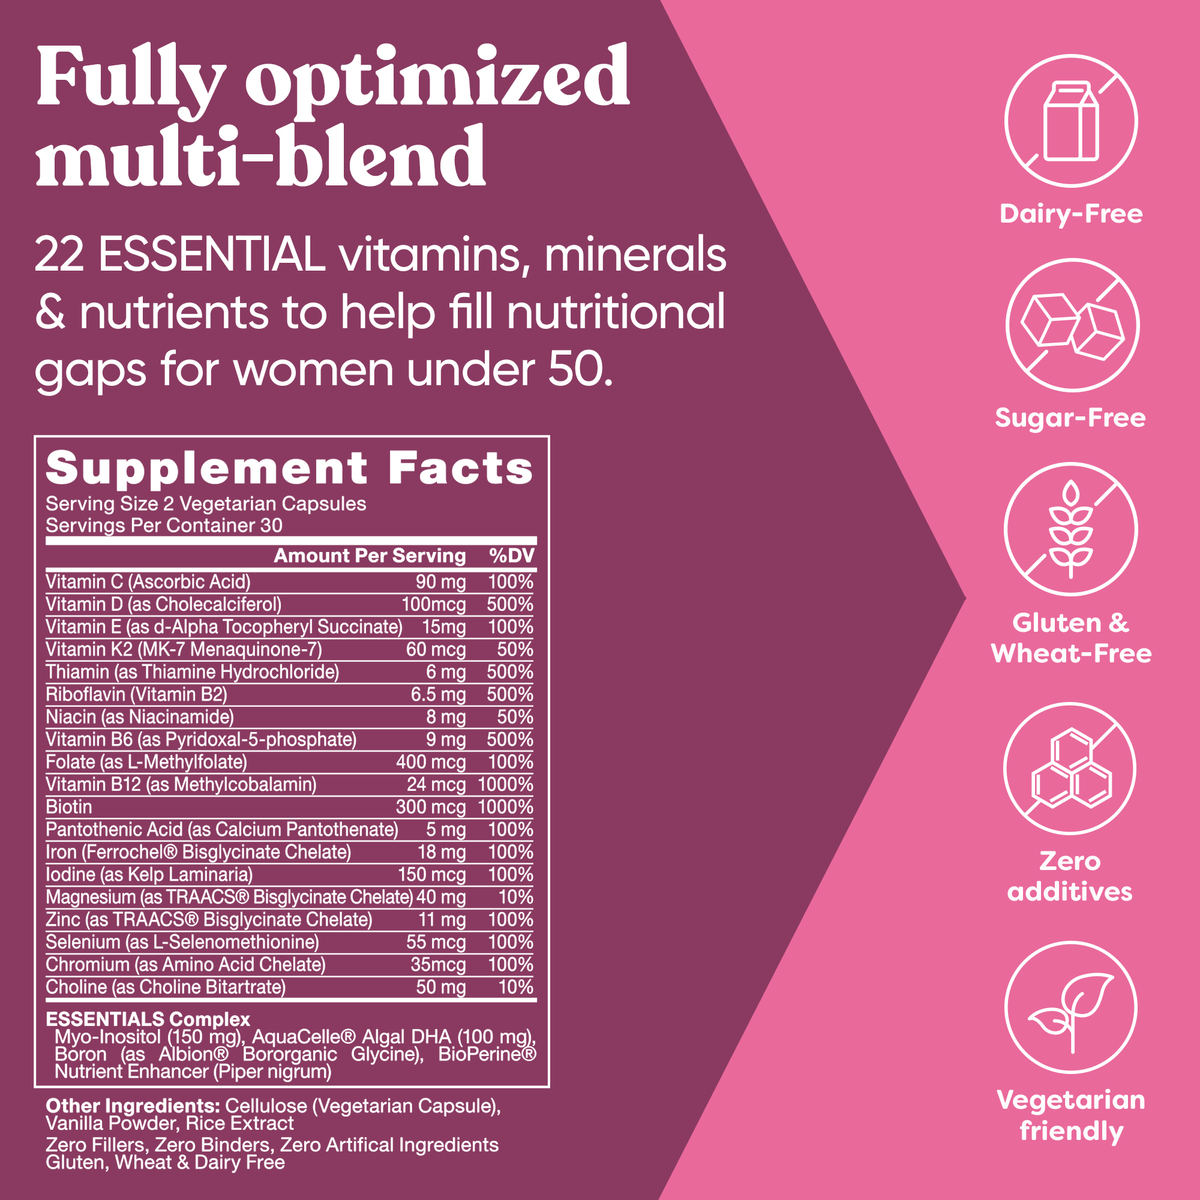 Eu Natural NEXT GEN FOR HER MULTIVITAMIN FOR WOMEN (formally known as ESSENTIALS, packaging may vary)